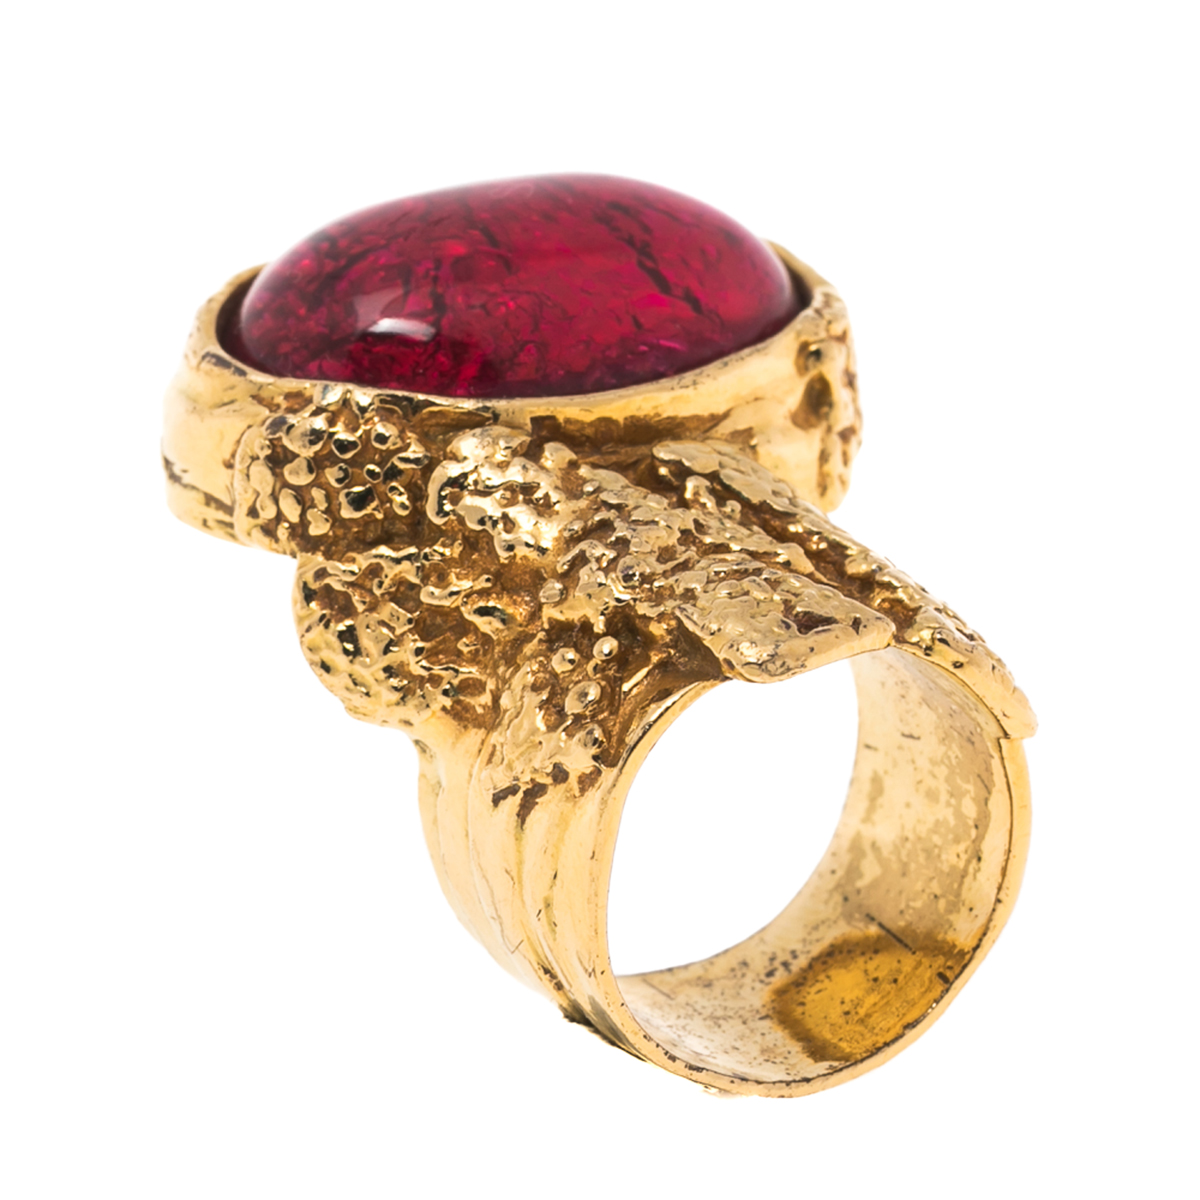 Yves Saint Laurent Magenta Glass Cabochon Gold Tone Arty Ring Size 8